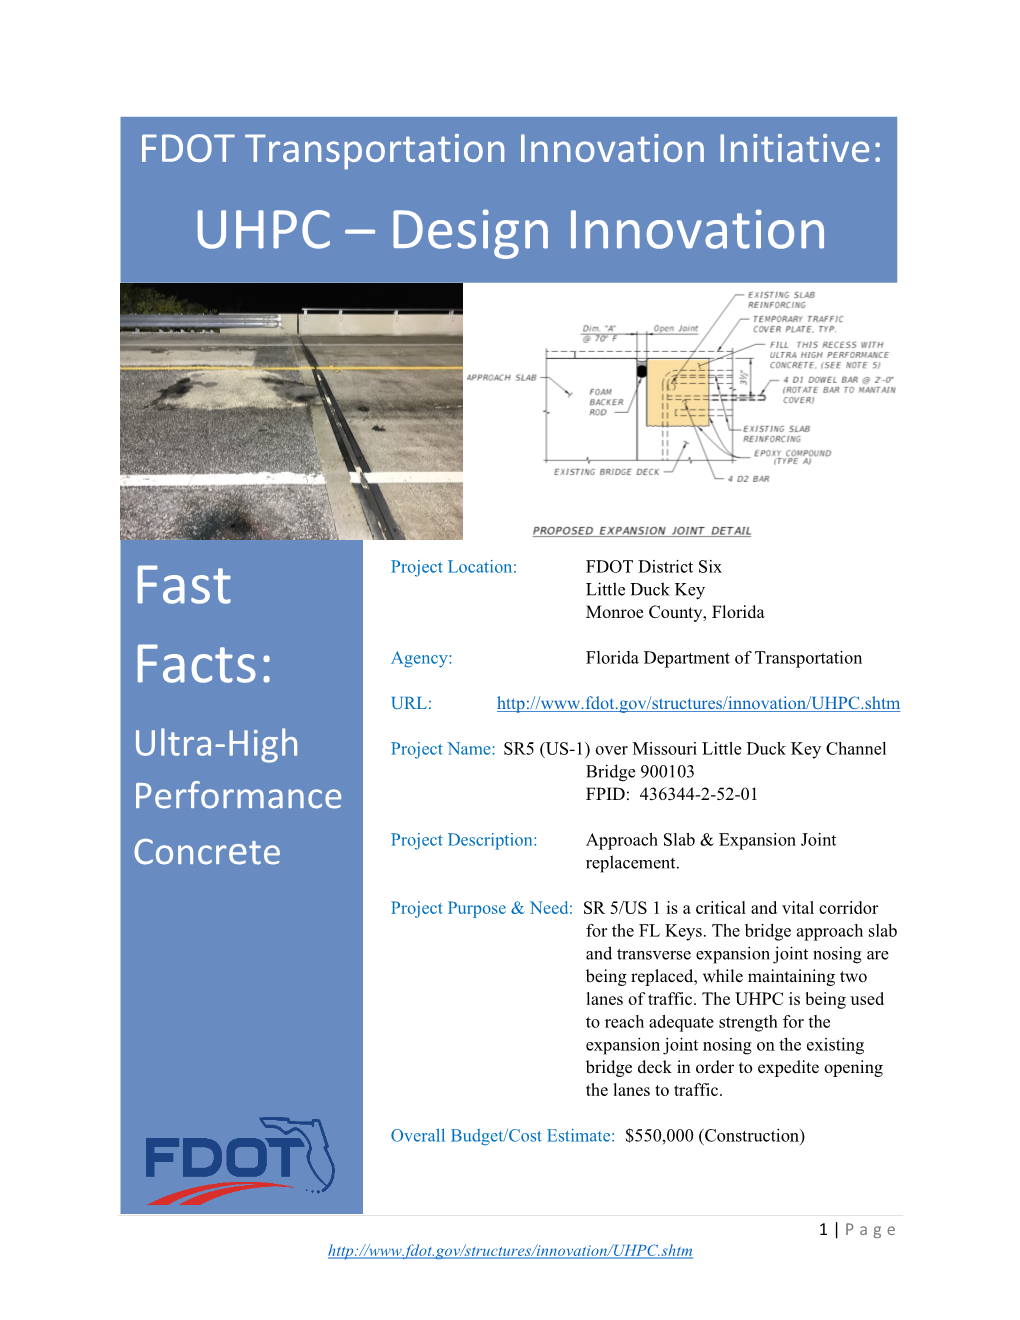 UHPC – Design Innovation Fast Facts